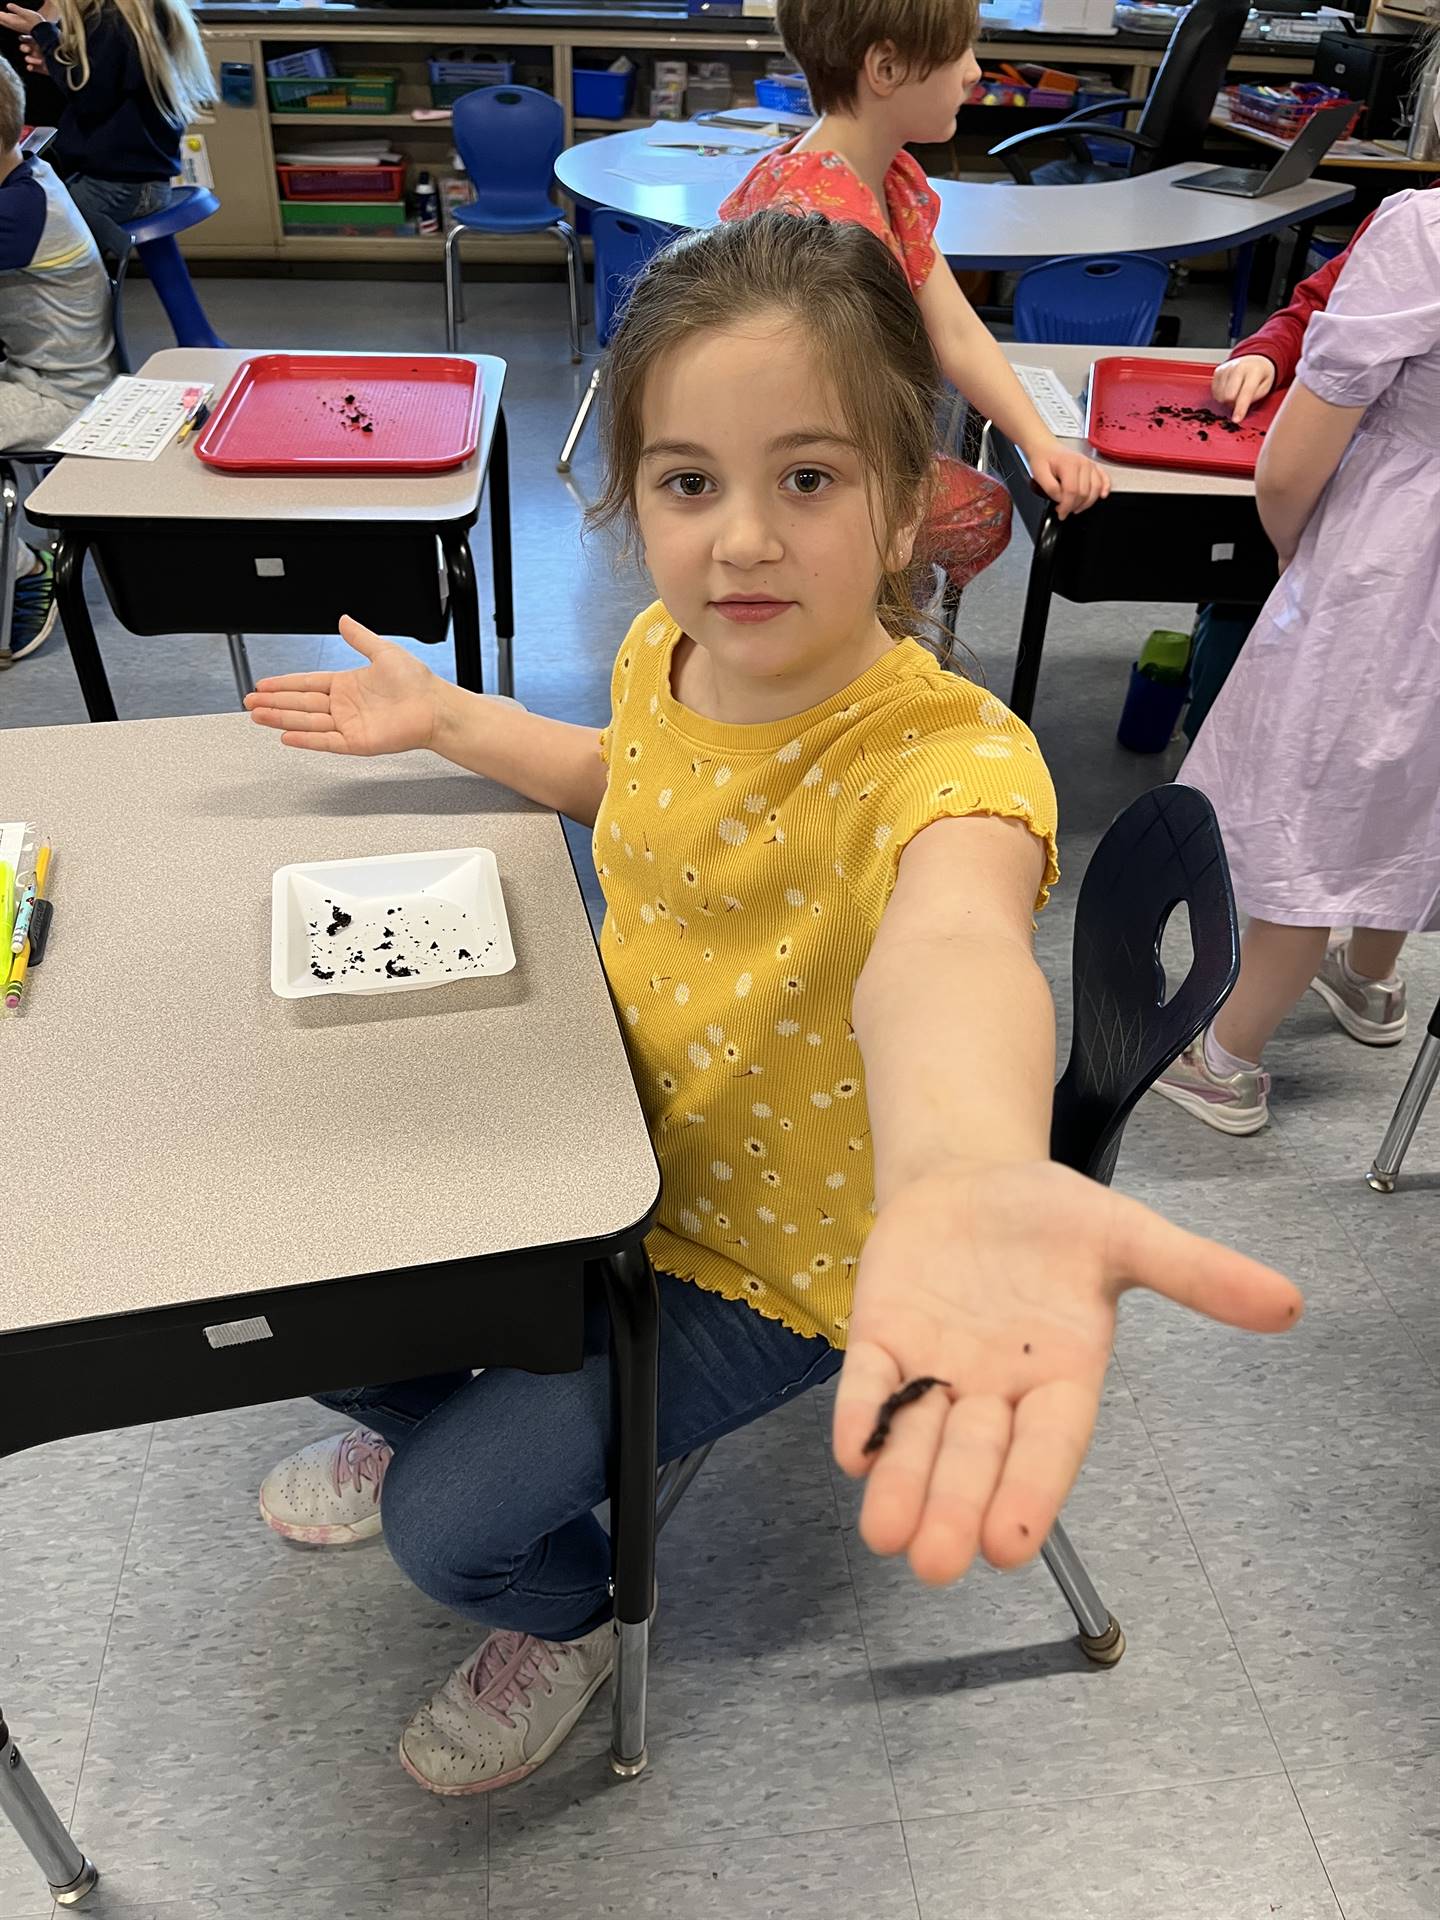 a student watches as a worm crawls on her hand